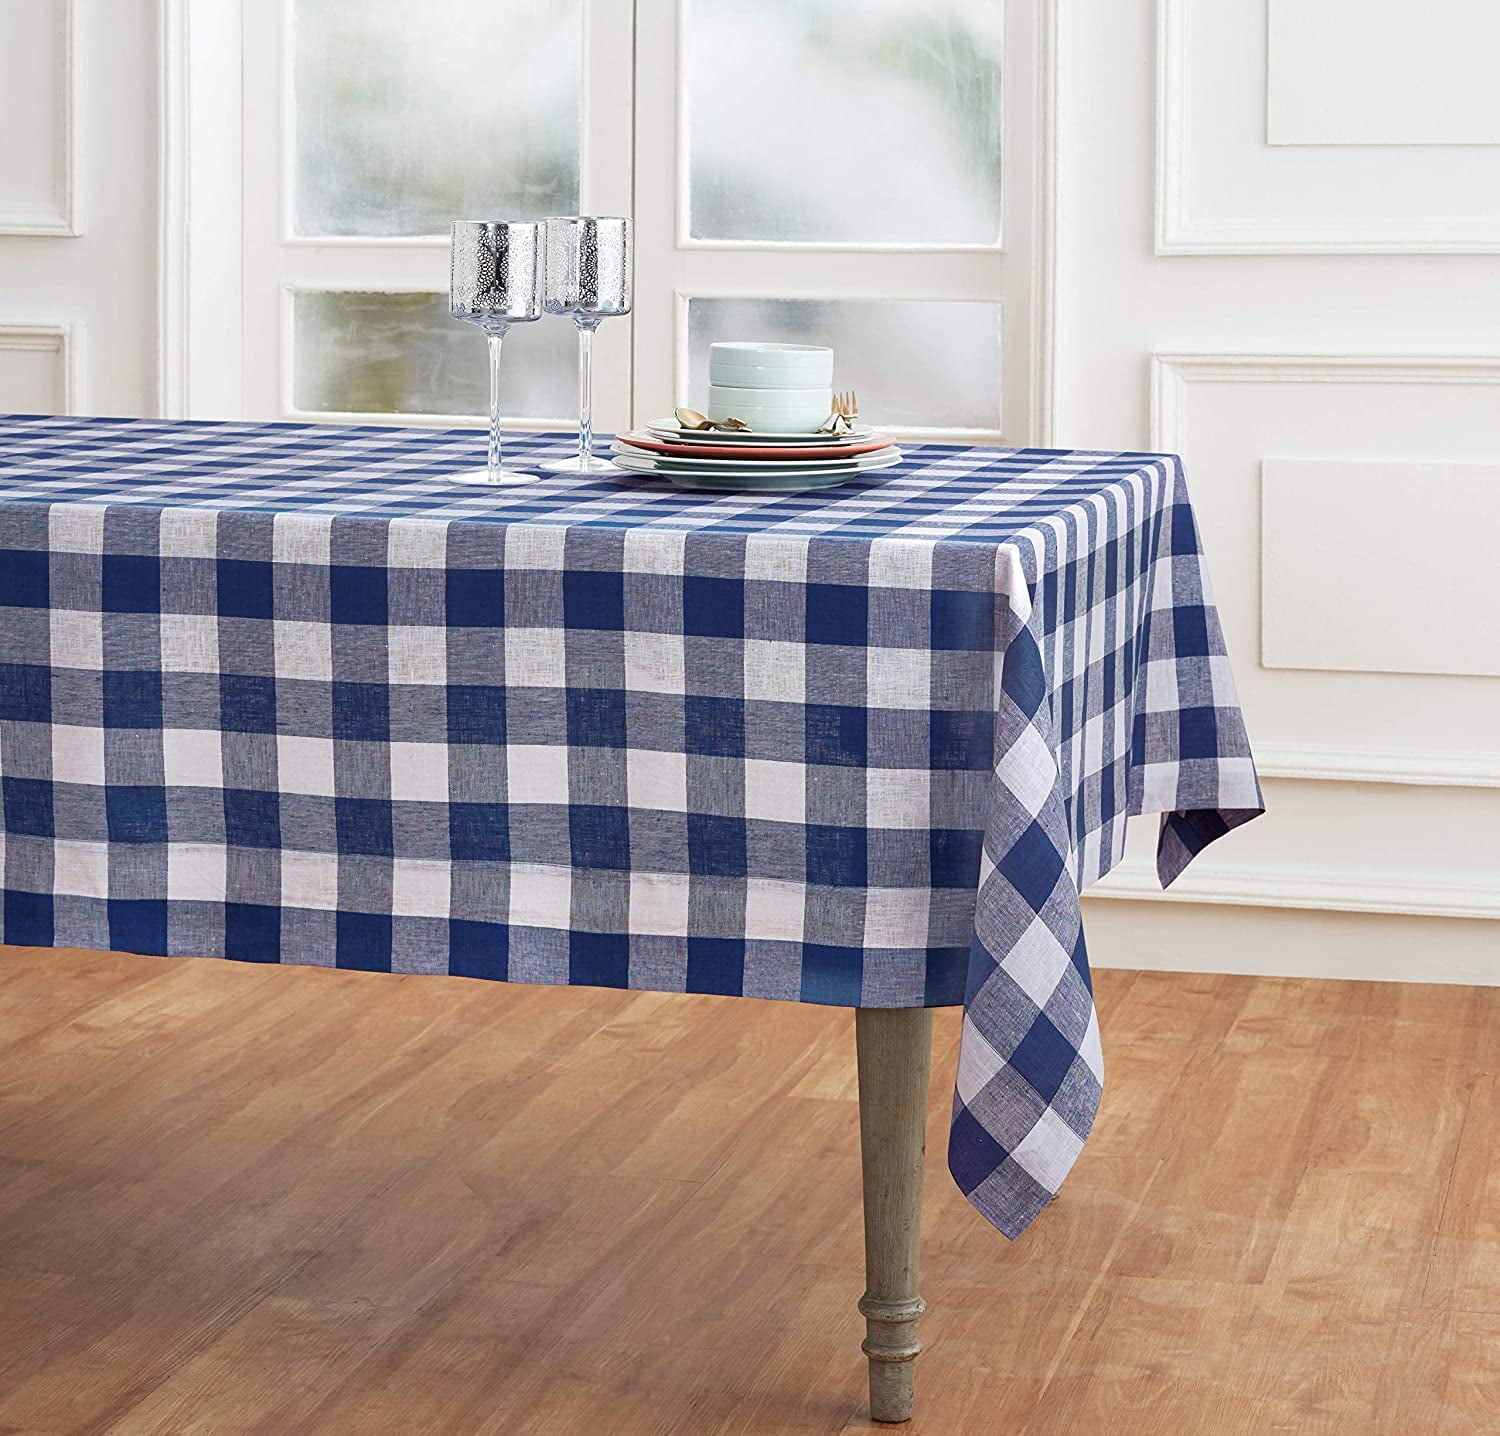 Rectangular Linen Tablecloth for Indoor and Outdoor use 60 x 90 Inch Black & White Solino Home 100% Pure Linen Buffalo Check Tablecloth 